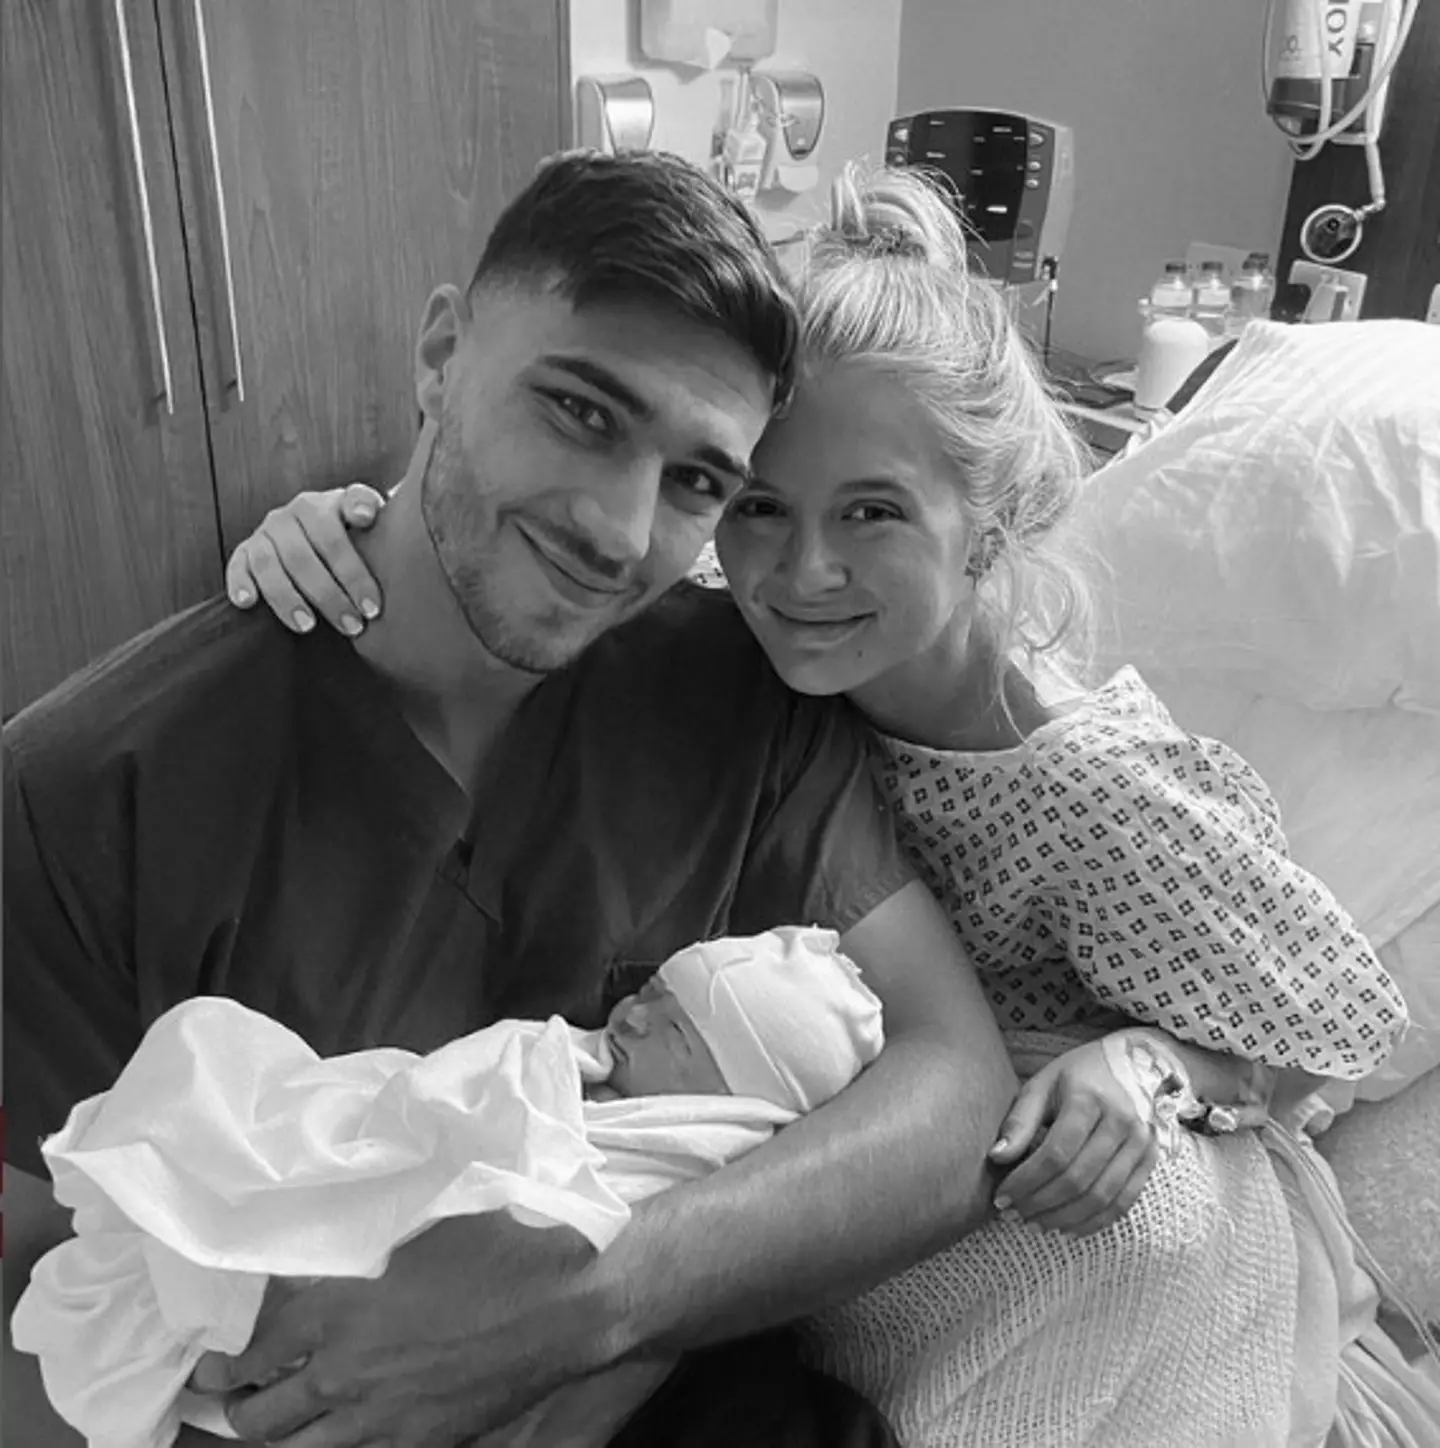 Molly-Mae and Tommy Fury welcomed their baby daughter into the world on 23 January.